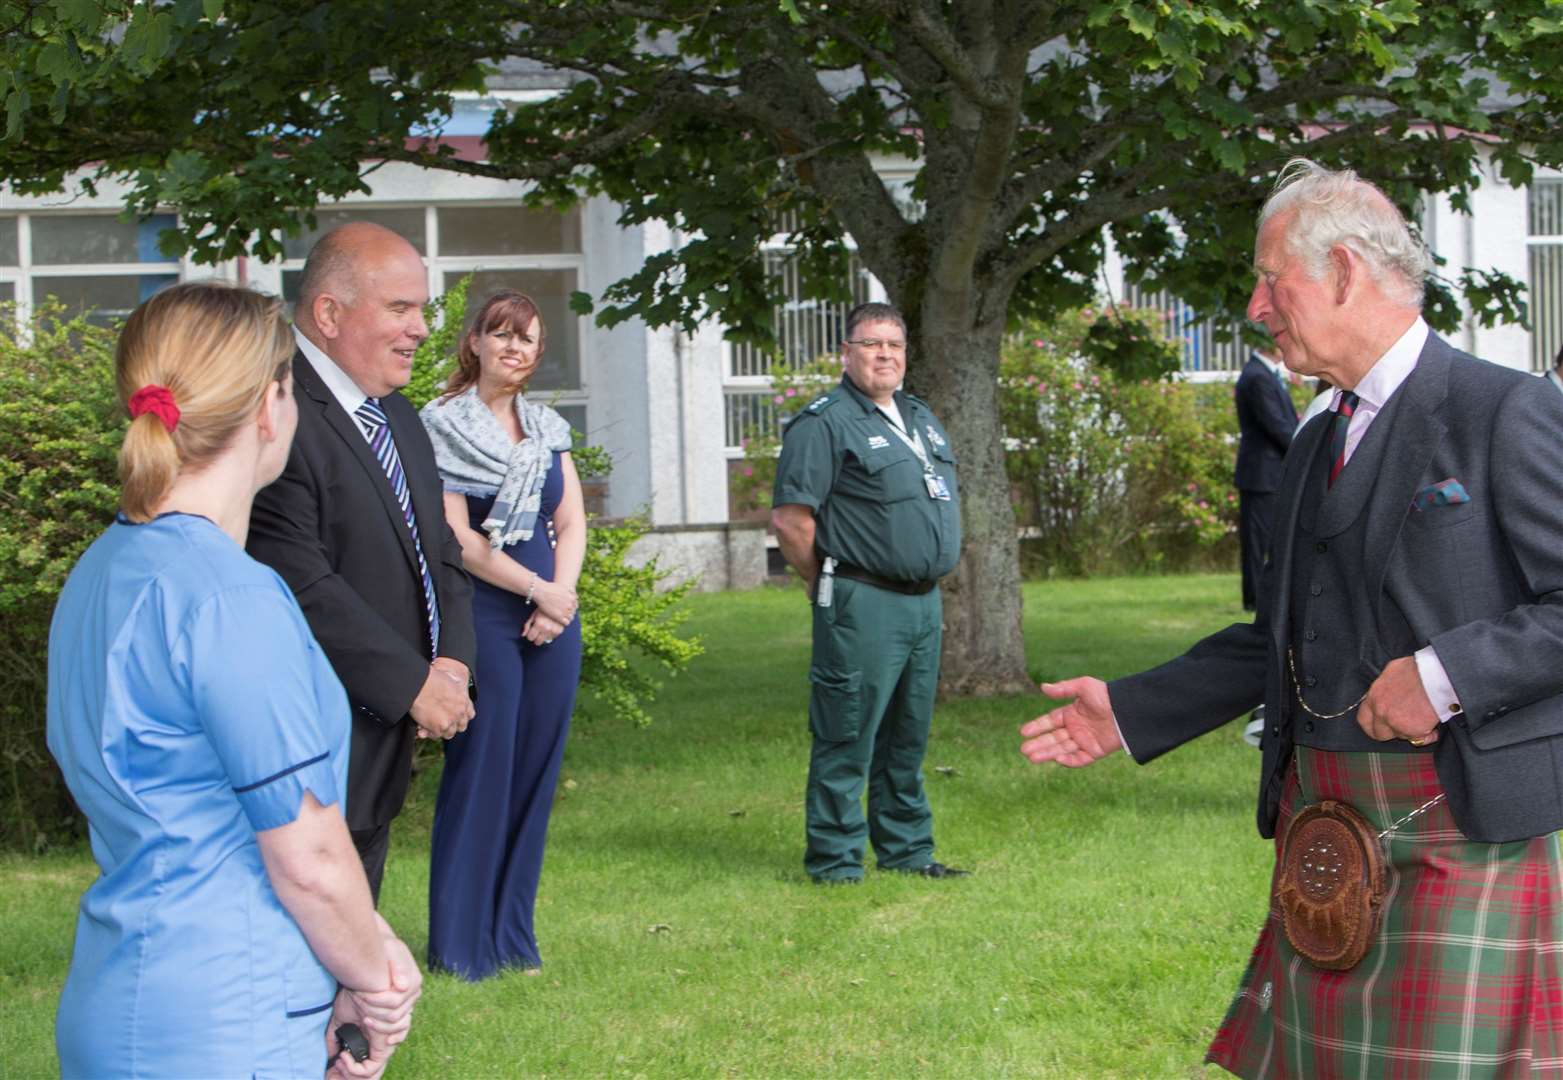 Being introduced to Prince Charles during Friday's visit are (from left) Linda Macdougall, senior district nurse covering the Canisbay/John O'Groats area; Chris Mackenzie, who is in charge of the Caithness Mental Health Support Group, including Stepping Stones, Thurso, and The Haven, Wick; Lesley Campbell, who was seconded from her job as a CPN to manage the Covid-19 assessment centre; and Graham Cormack, area service manger for the Scottish Ambulance Service. Picture: Robert MacDonald / Northern Studios